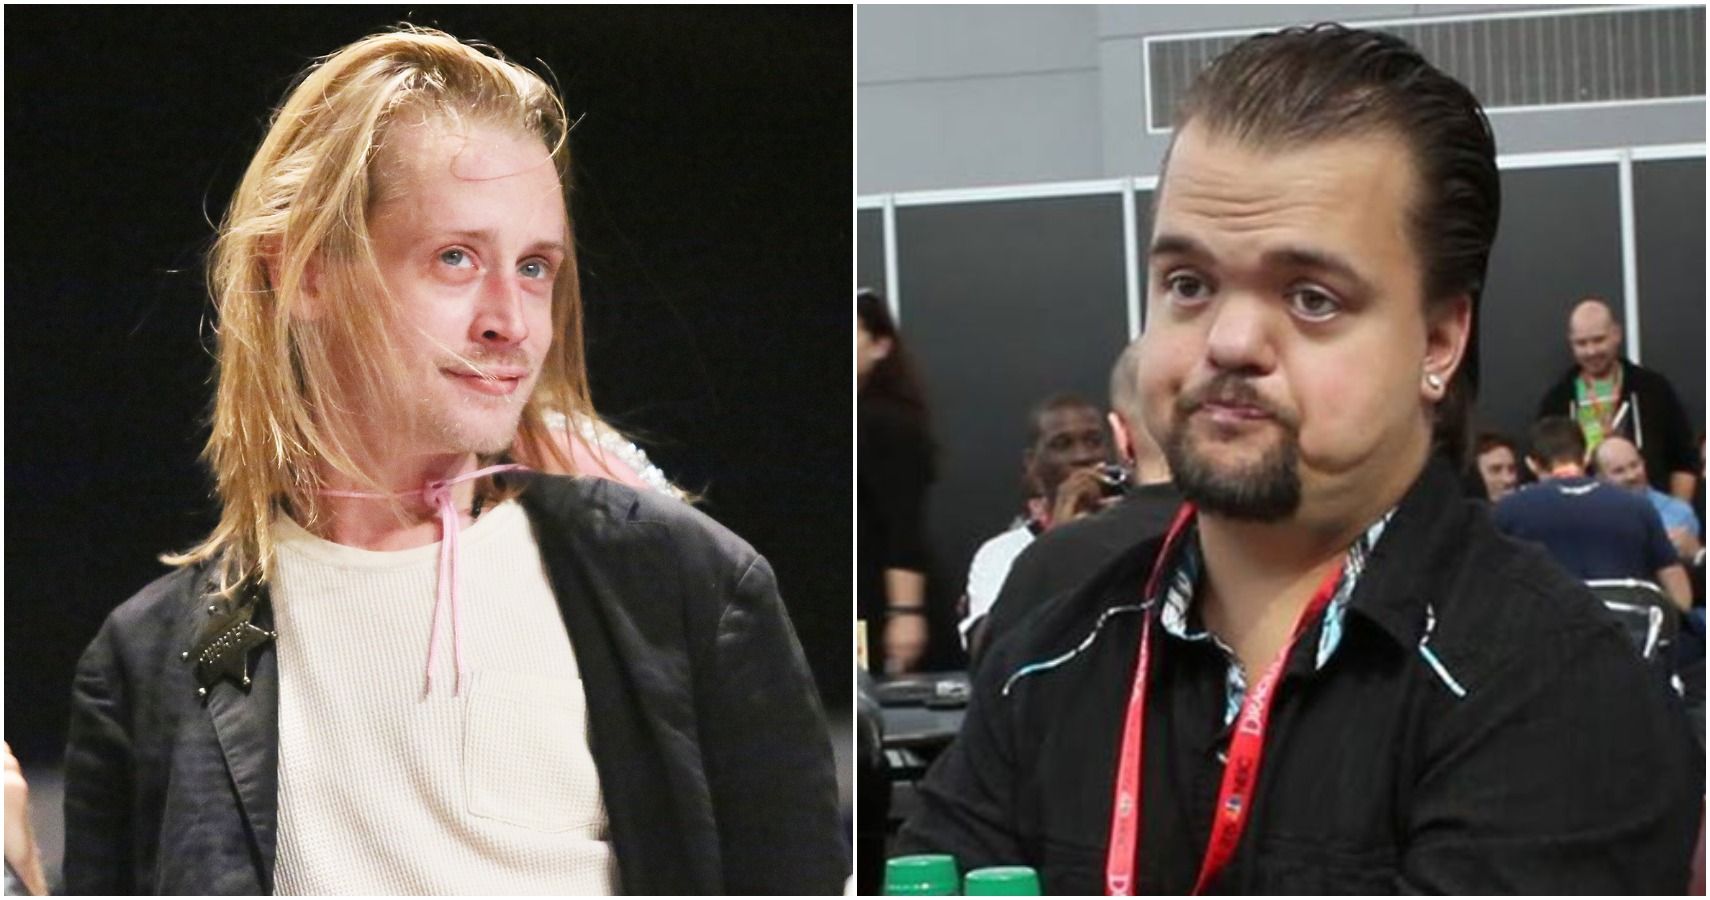 Macaulay Culkin Invades Wrestling Show To Beat Up Hornswoggle [VIDEO]